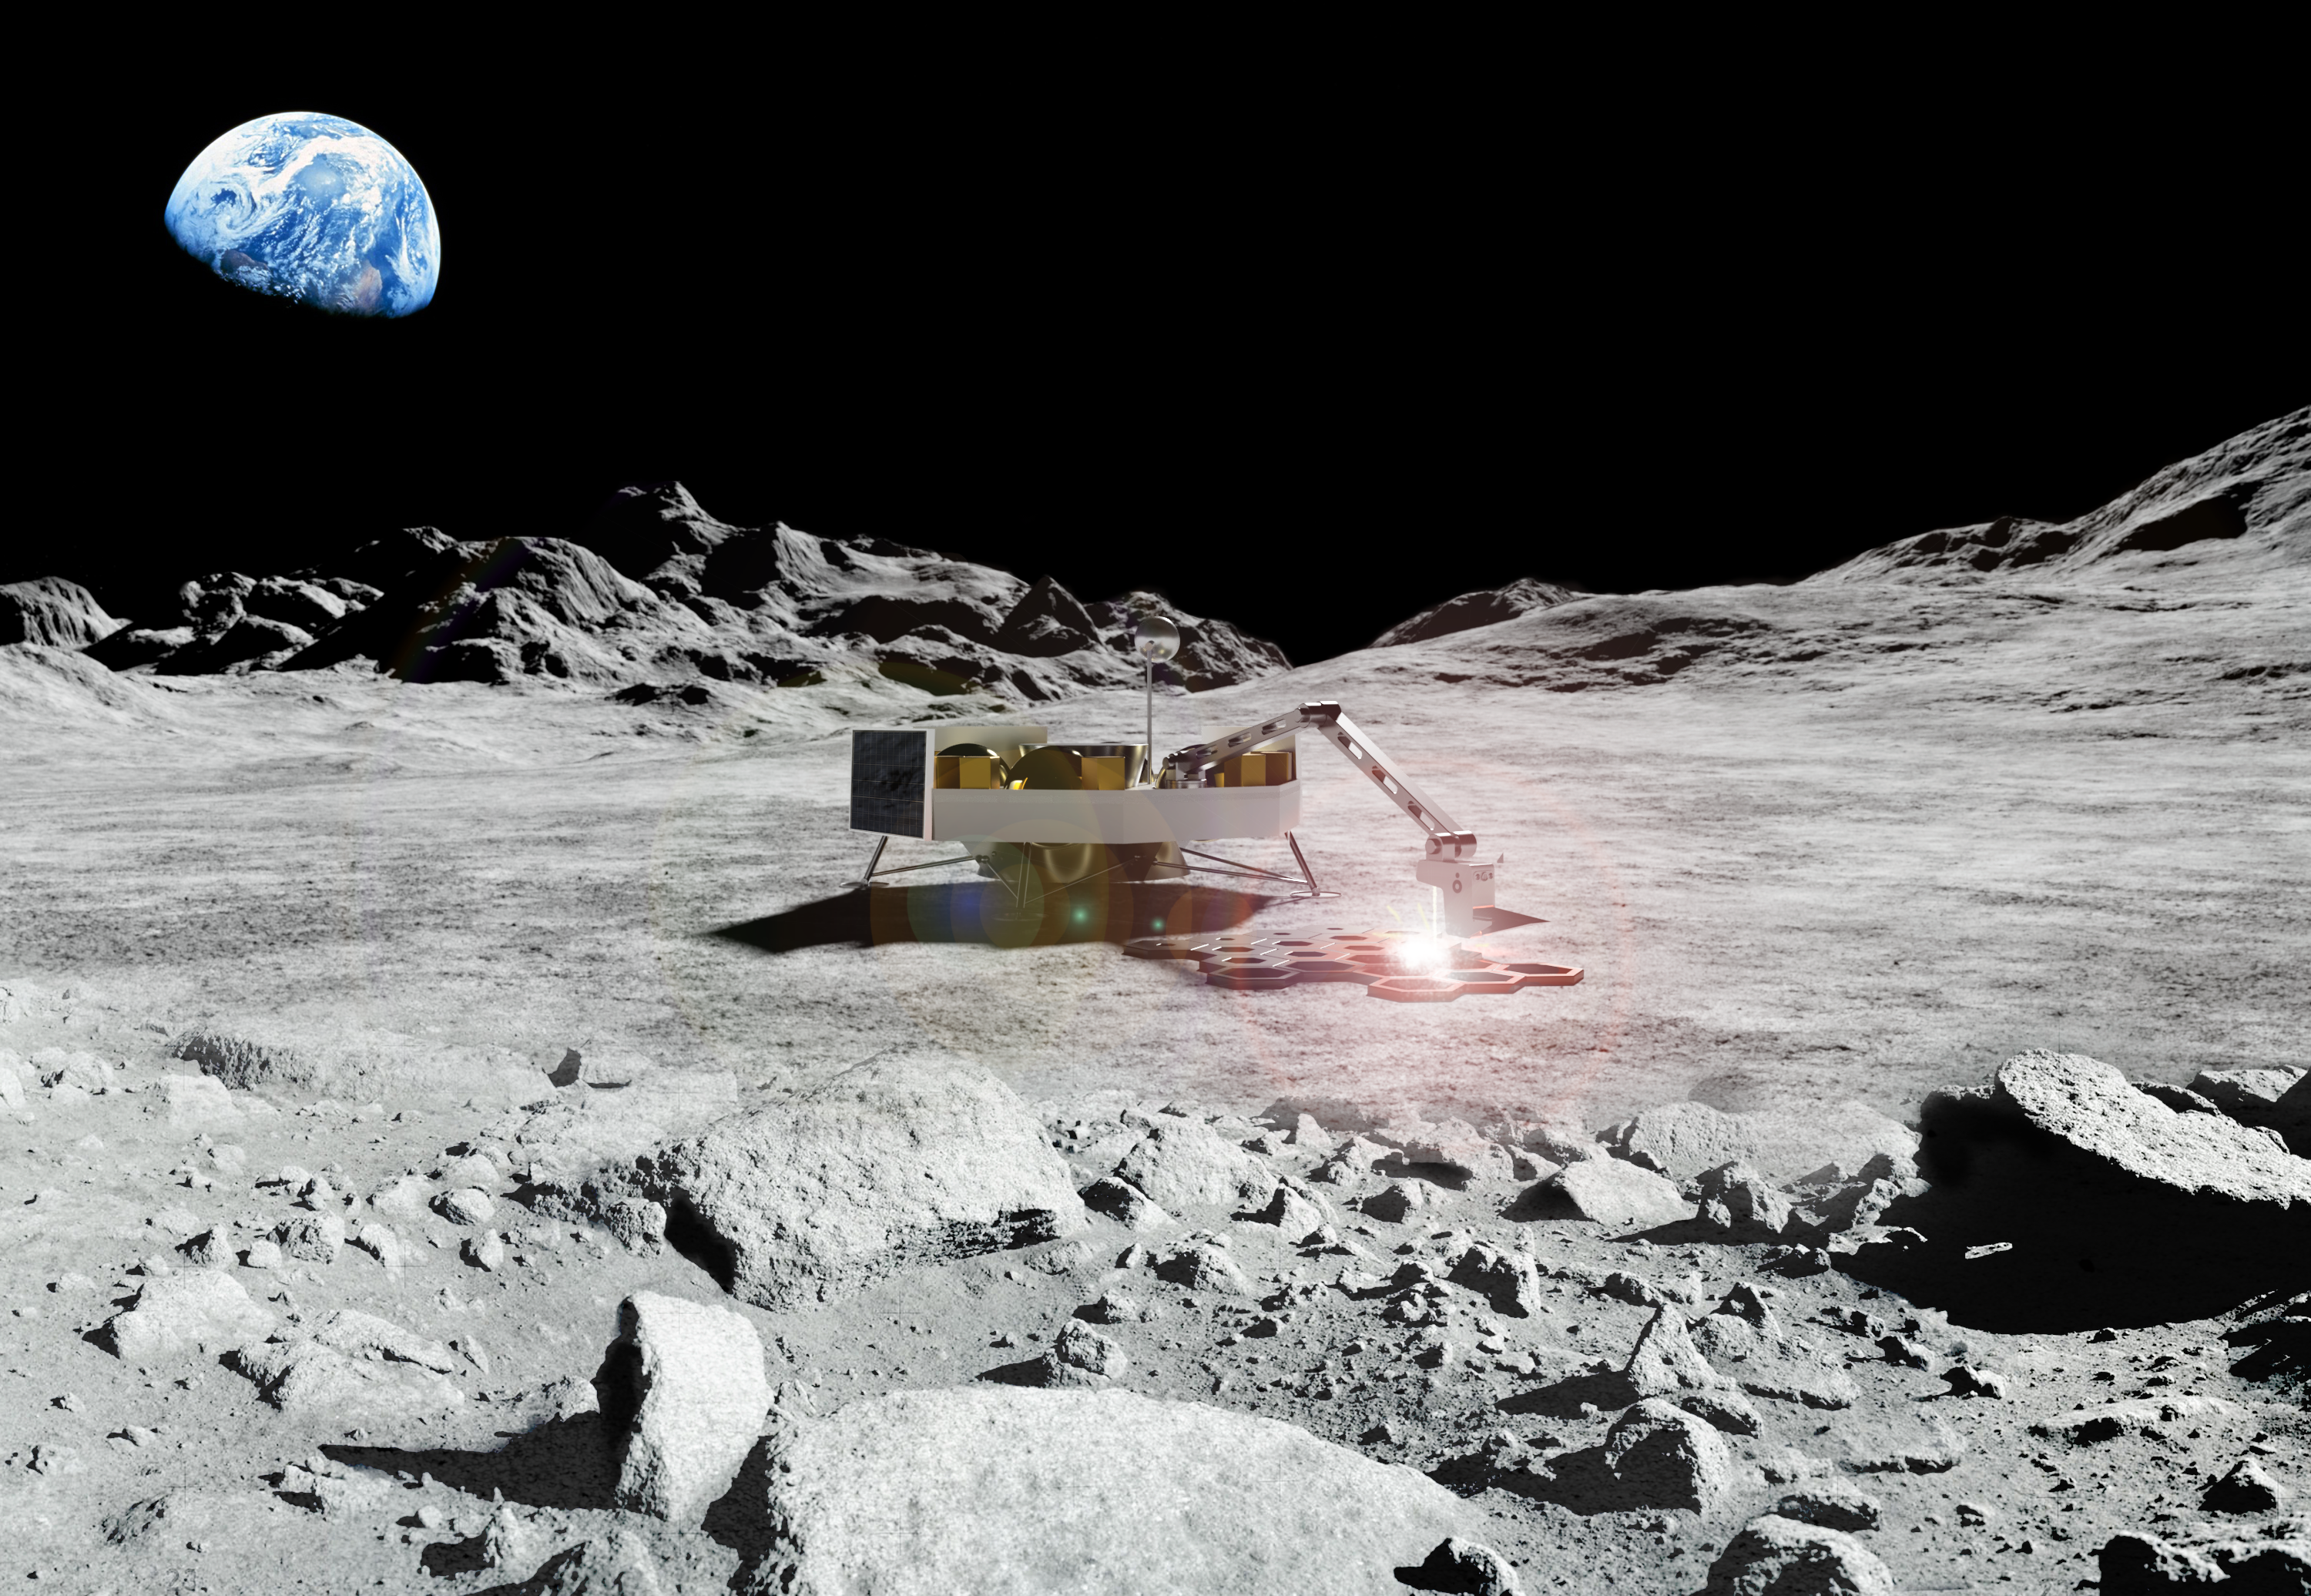 Concept art of ICON's Project Olympus 3D-printing infrastructure on the Moon. (ICON courtesy image)